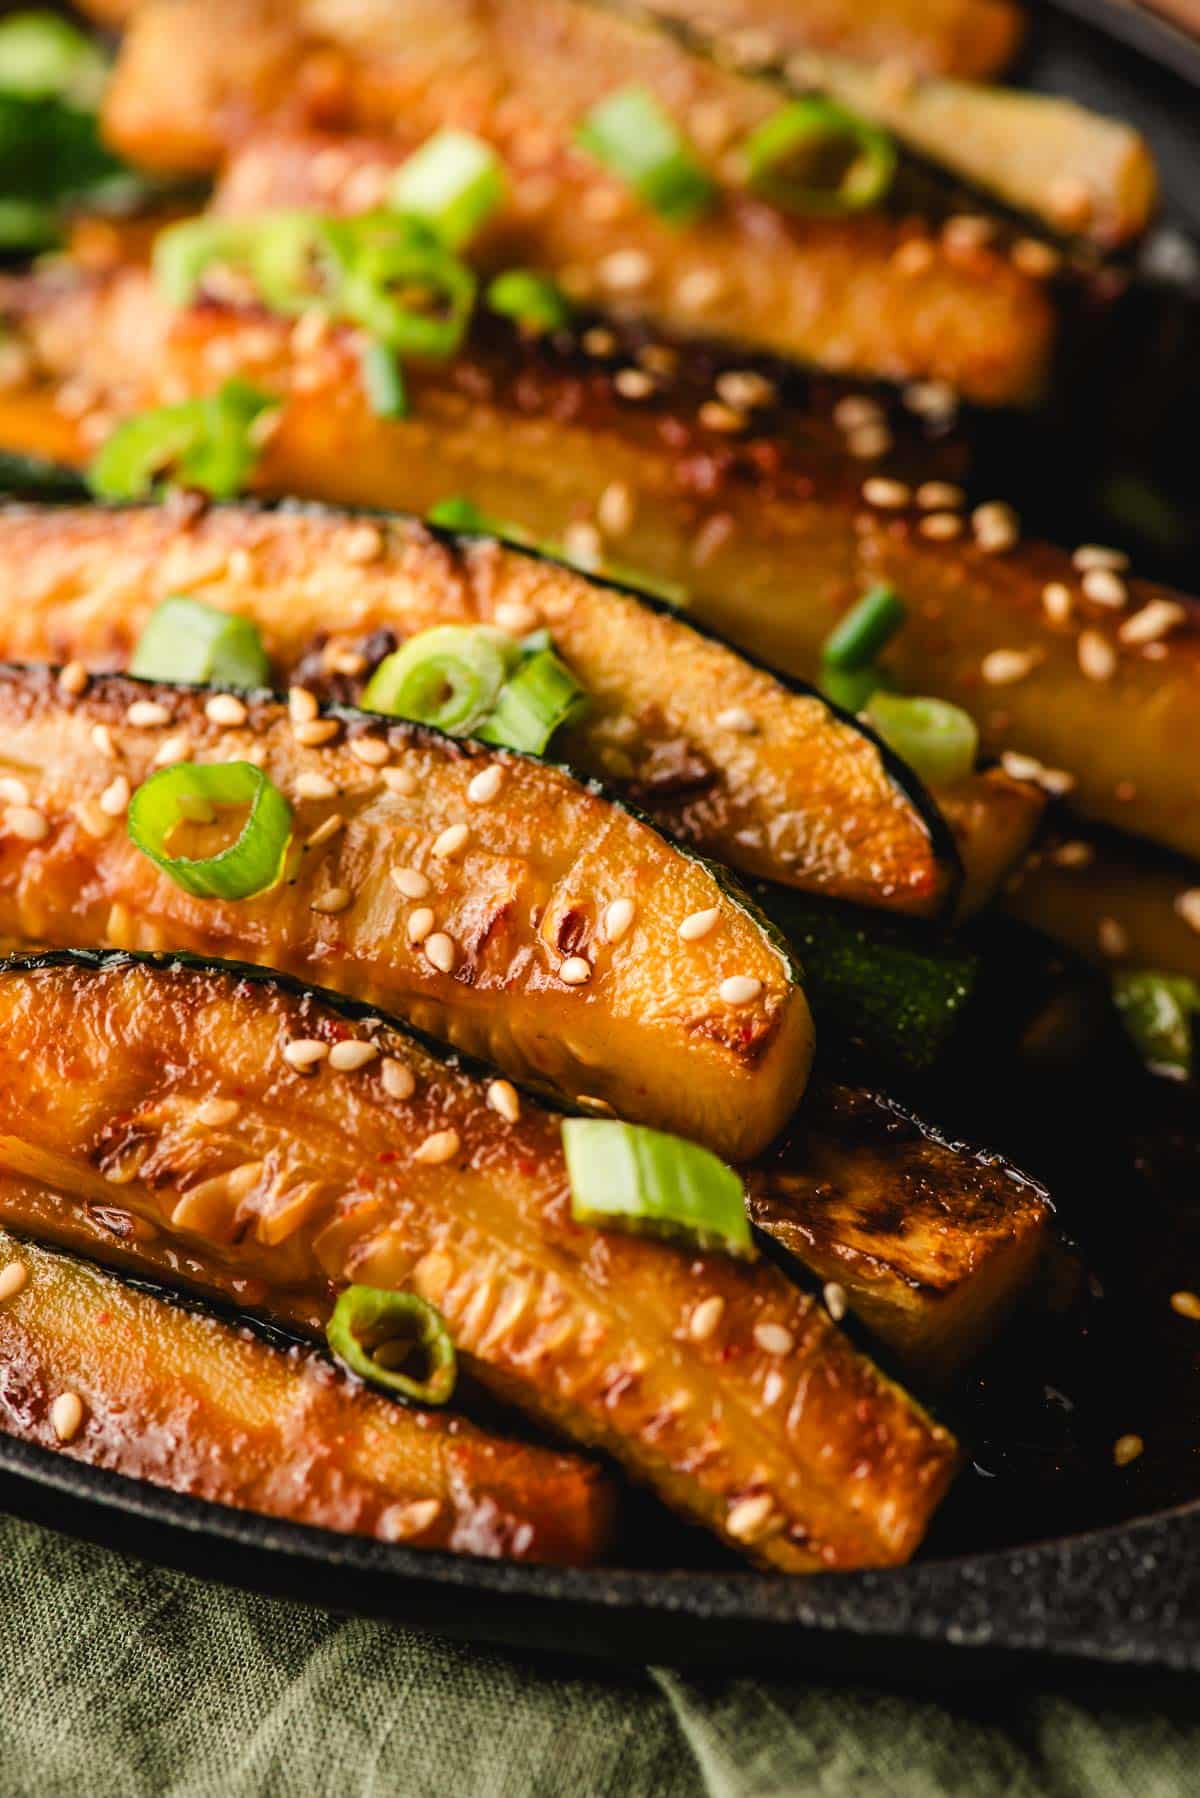 Spicy zucchini spears with a soy and sriracha sauce.